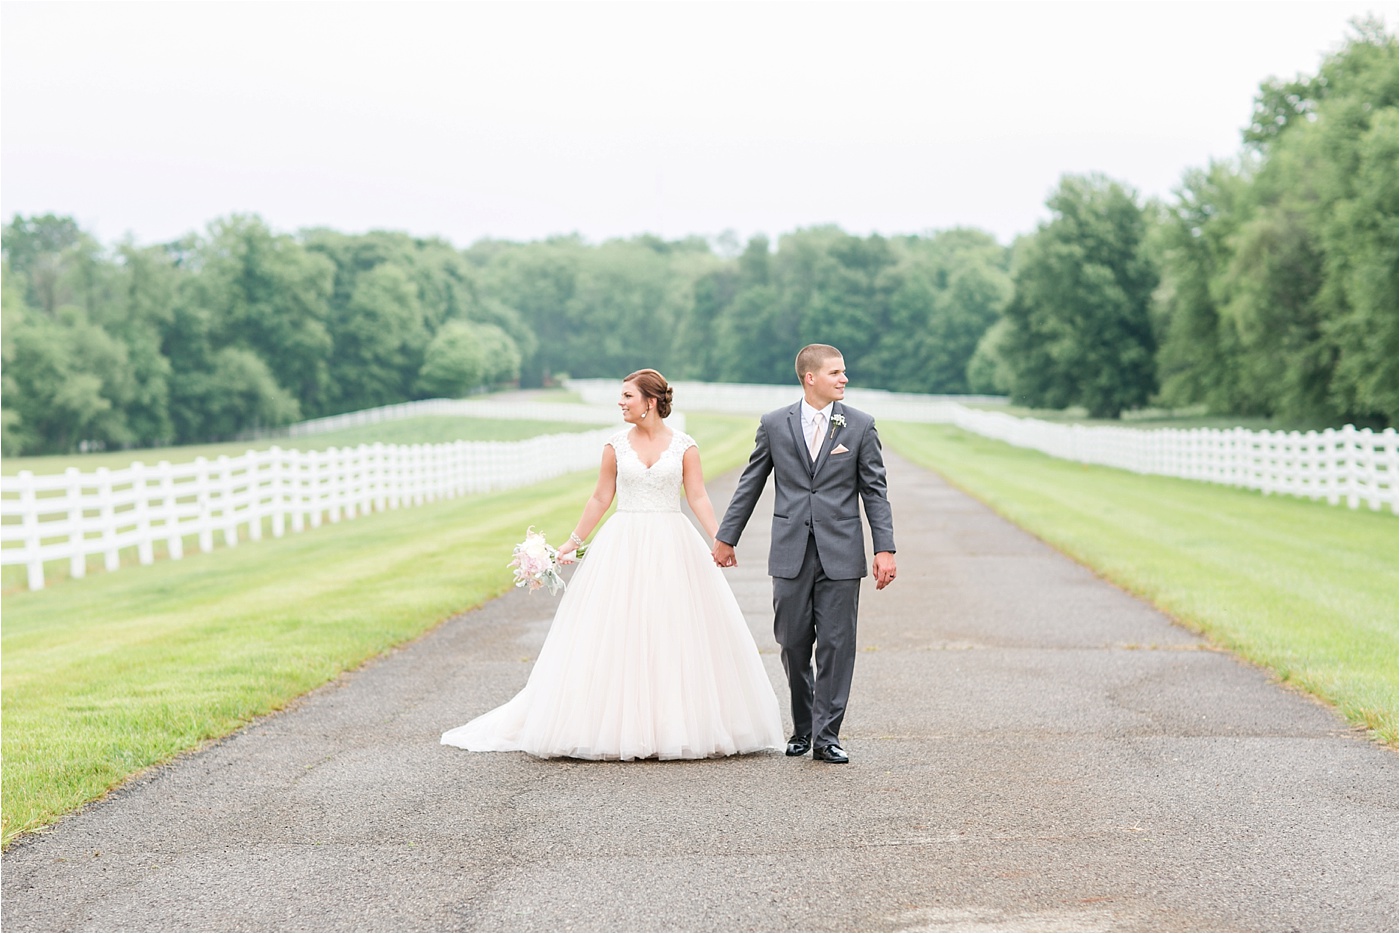 A Blush Outdoor wedding at Irongate Equestrian | KariMe Photography_0142